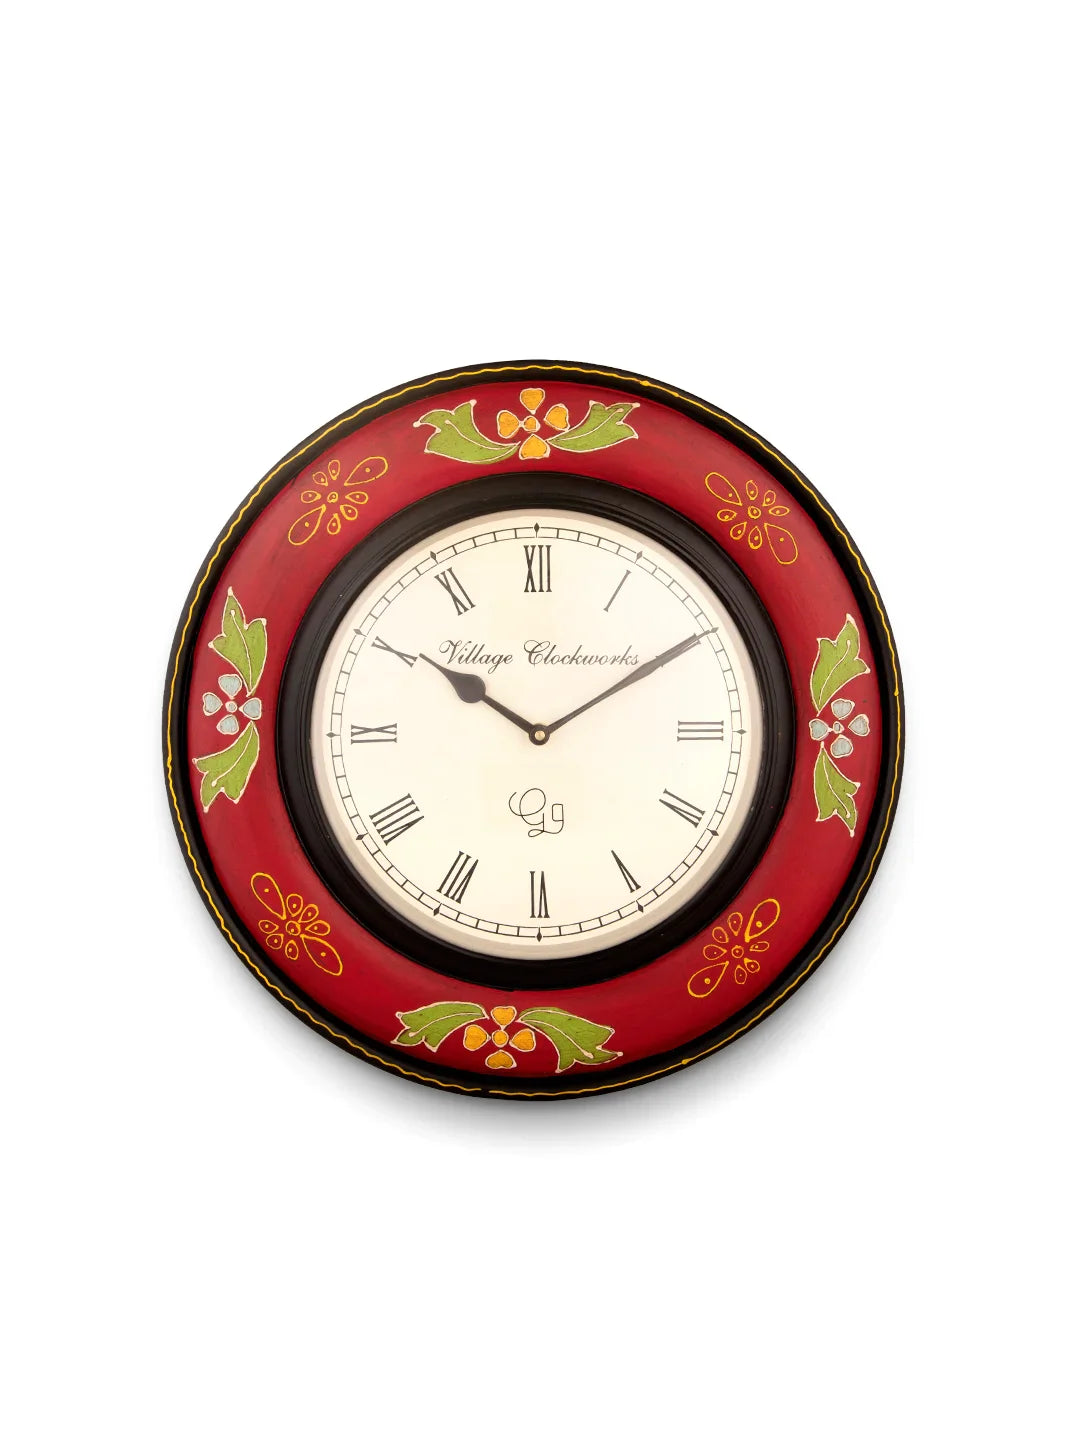 Round Wooden Handpainted 16 Inches Analog Wall Clock